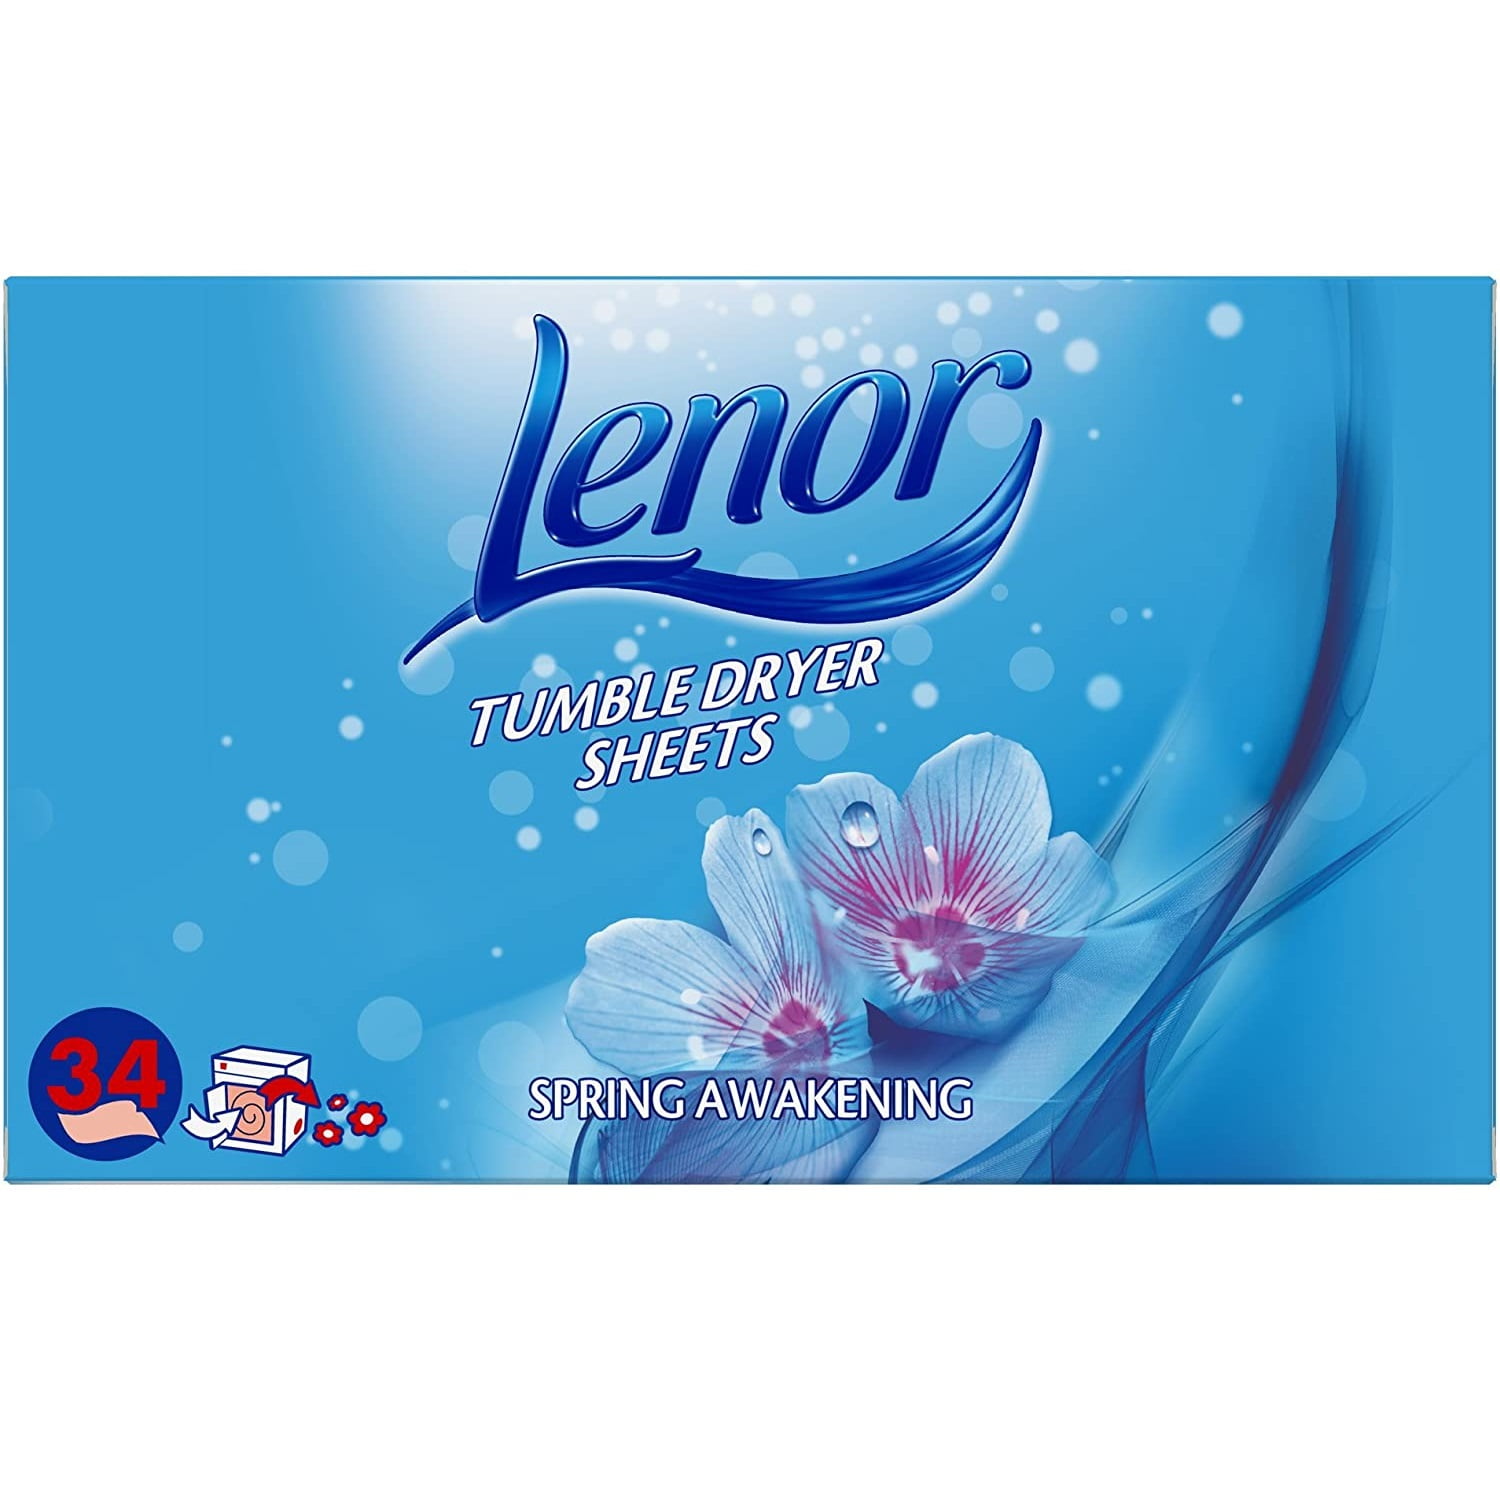 Household Care from Germany Lenor Aprilfrisch Tumble Dryer Sheets 34 pcs 